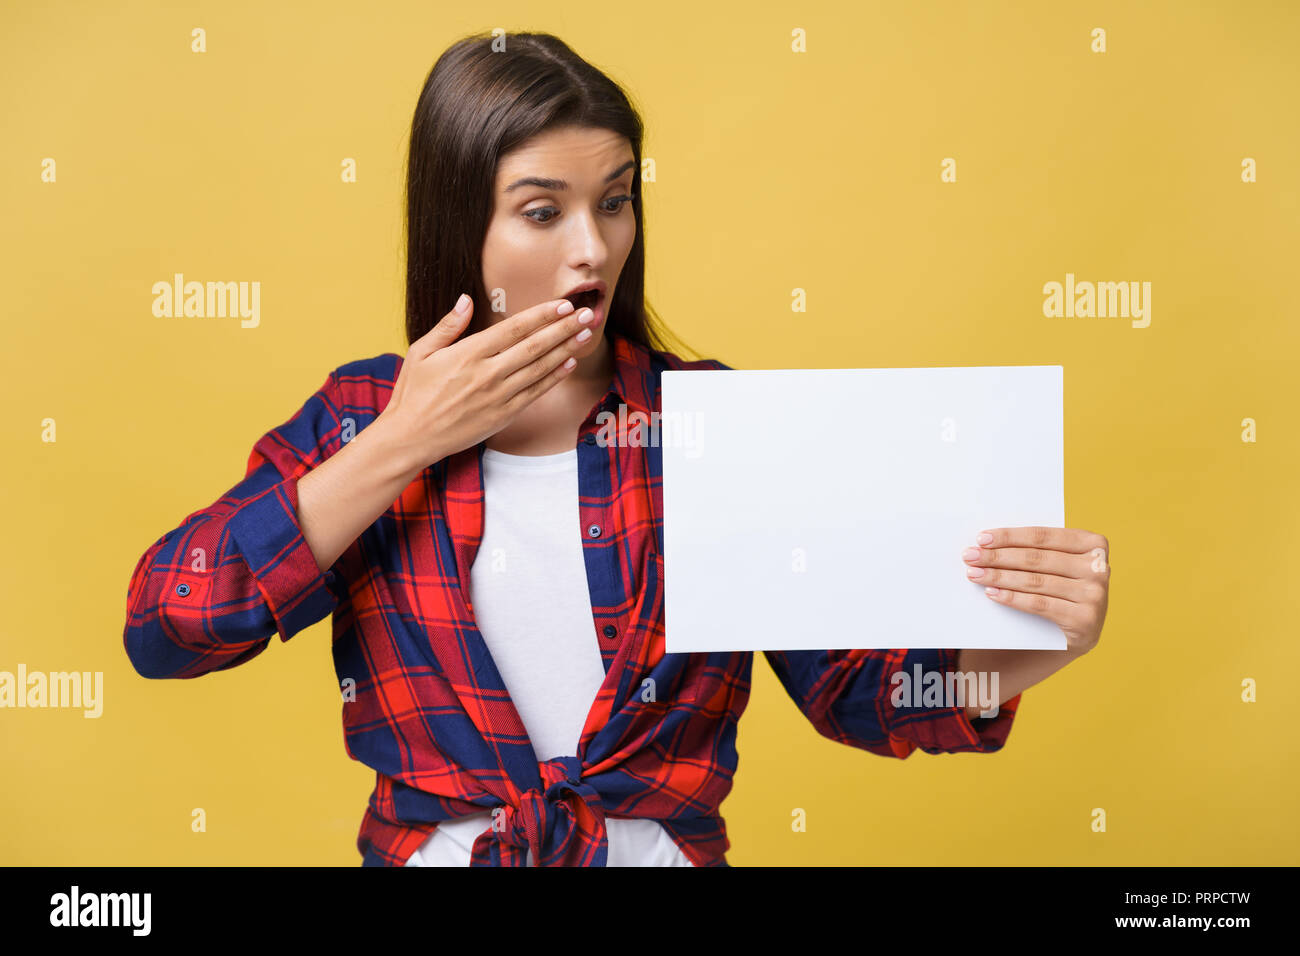 Amazement or surprised female with blank white panel, isolated on yellow background. Stock Photo